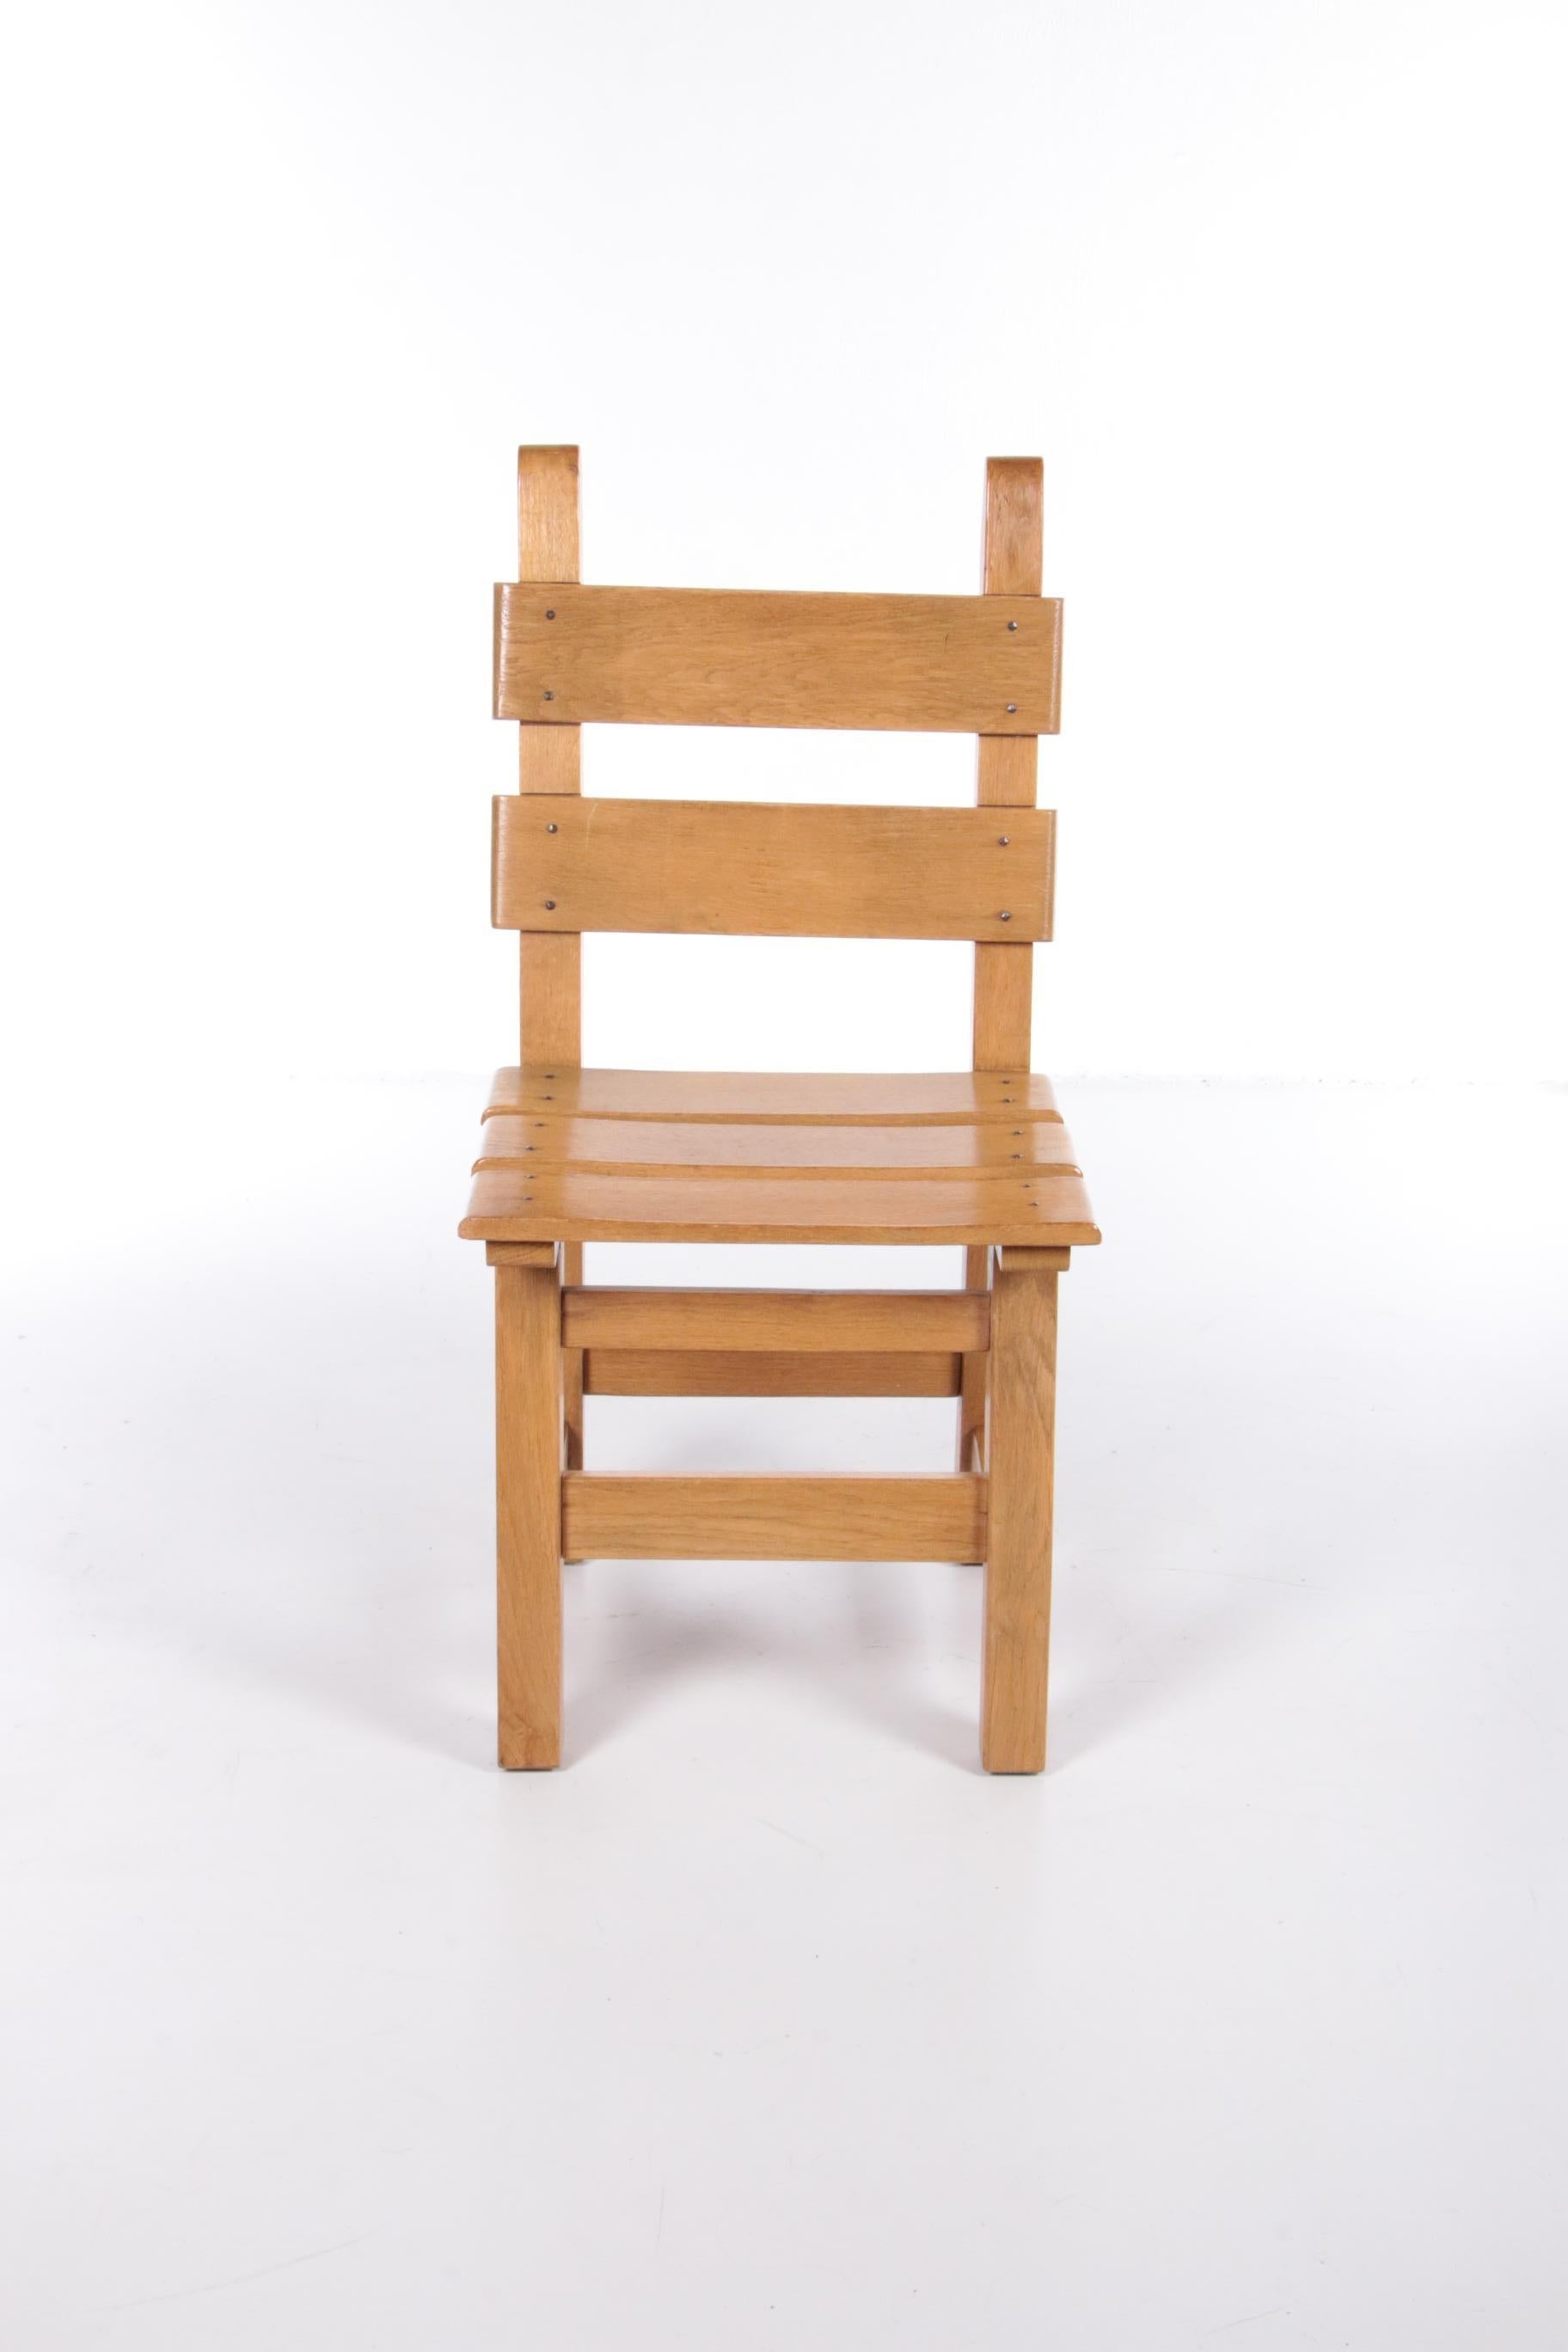 Spanish Brutalistic Set of 4 Sturdy Wooden Chairs, 1980